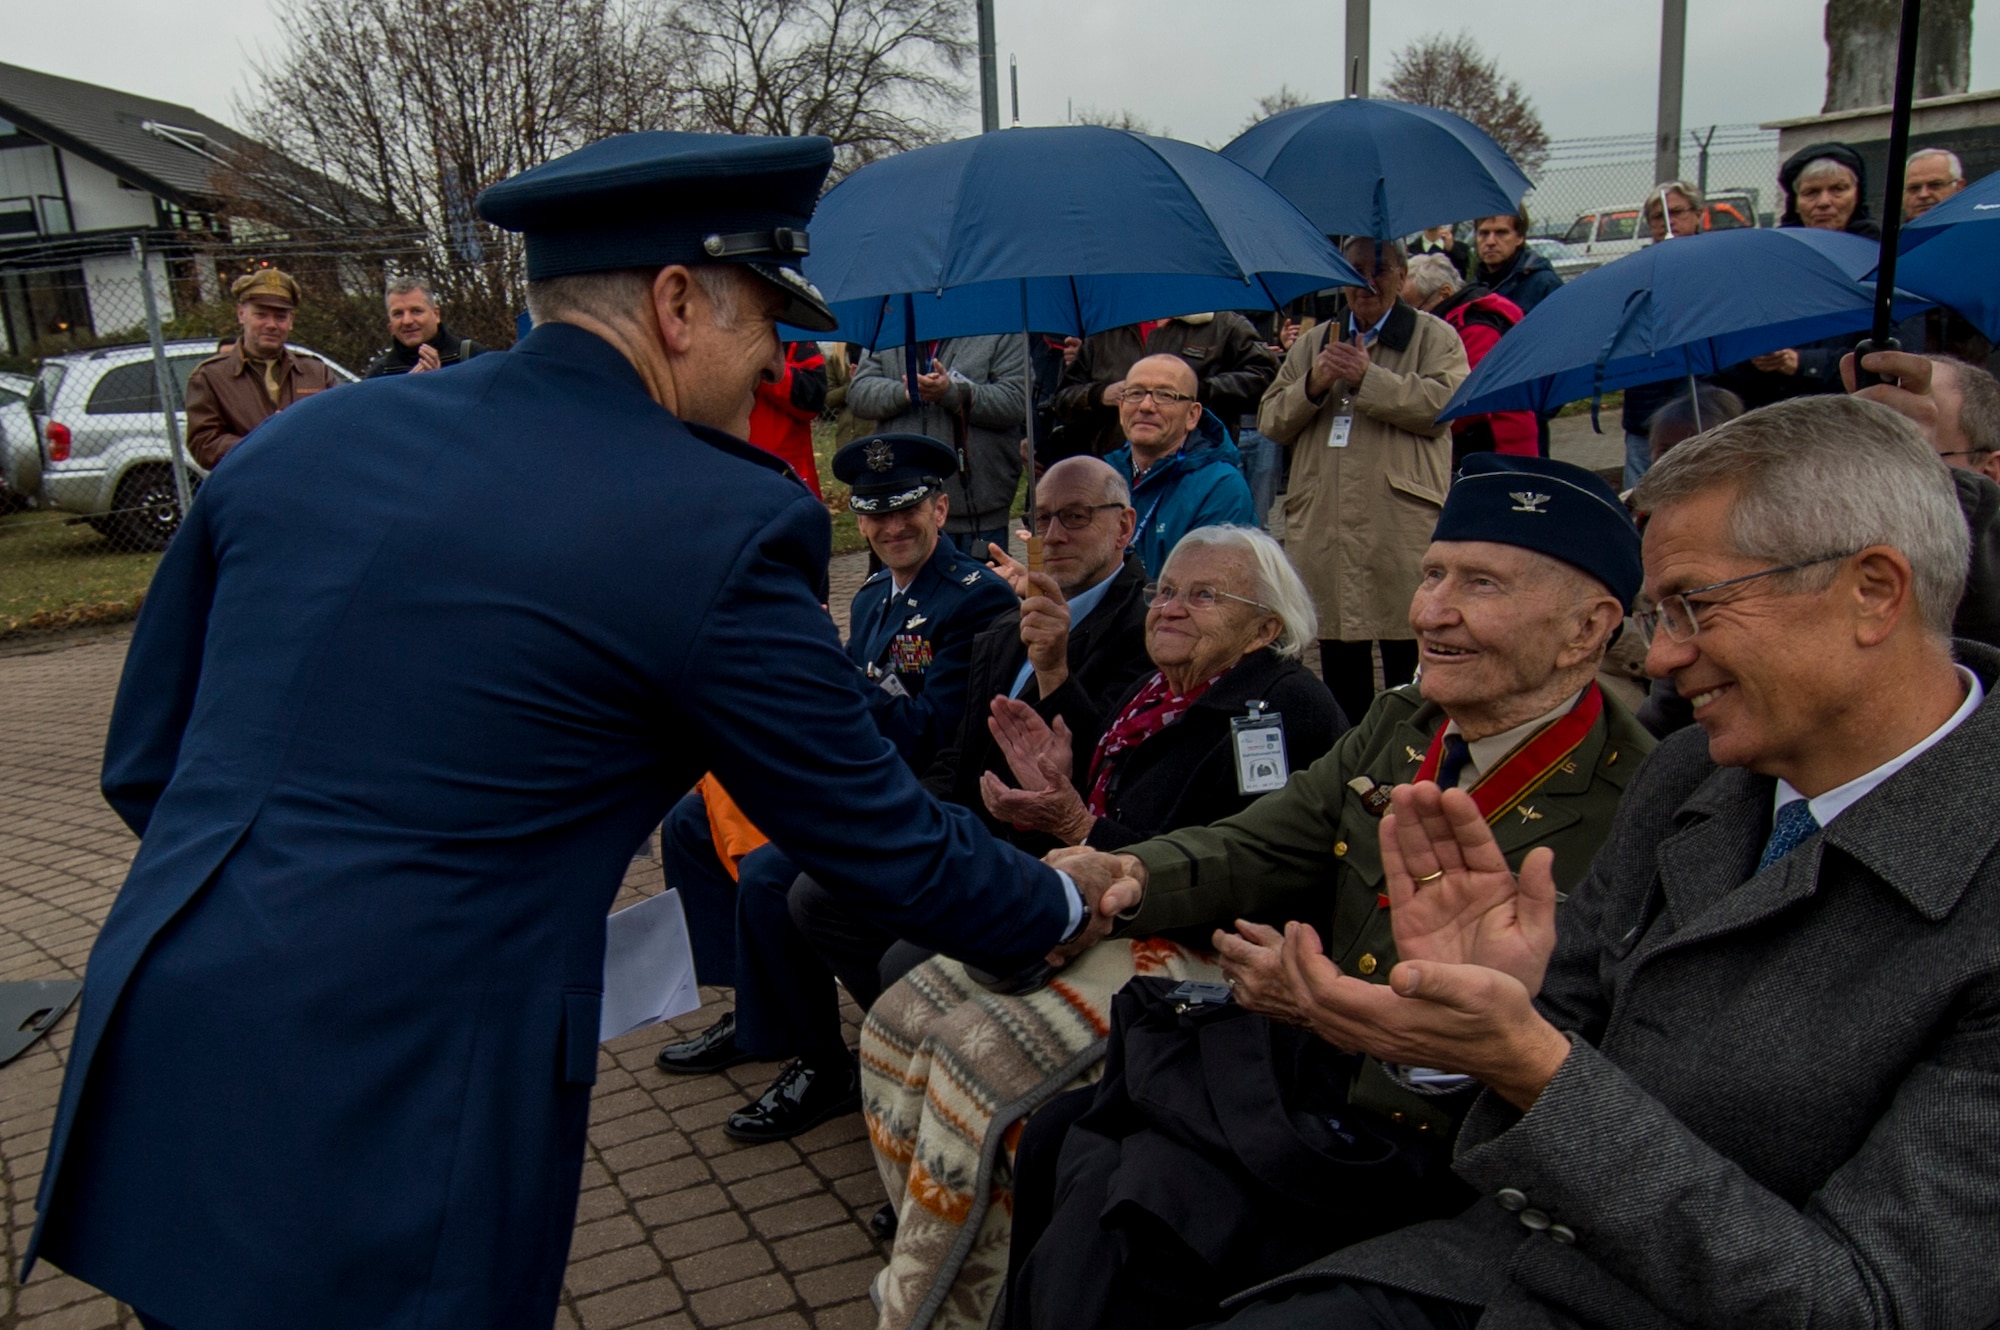 U.S. Air Force Col. Timothy Stretch, U.S. Air Forces Europe representative on behalf of the commander, shakes the hand of retired U.S. Air Force Col. Gail Halvorsen, also known as the Candy Bomber, during the reopening ceremony of the Berlin Airlift Memorial outside Frankfurt International Airport, Germany, Nov. 22, 2016. Halvorsen and his fellow Airmen dropped 23 tons of candy with makeshift parachutes from his C-54 Skymaster as part of the humanitarian supply mission, which delivered more than two million tons of food to the blockaded citizens of West Berlin between June 1948 and October 1949. (U.S. Air Force photo by Staff Sgt. Joe W. McFadden)